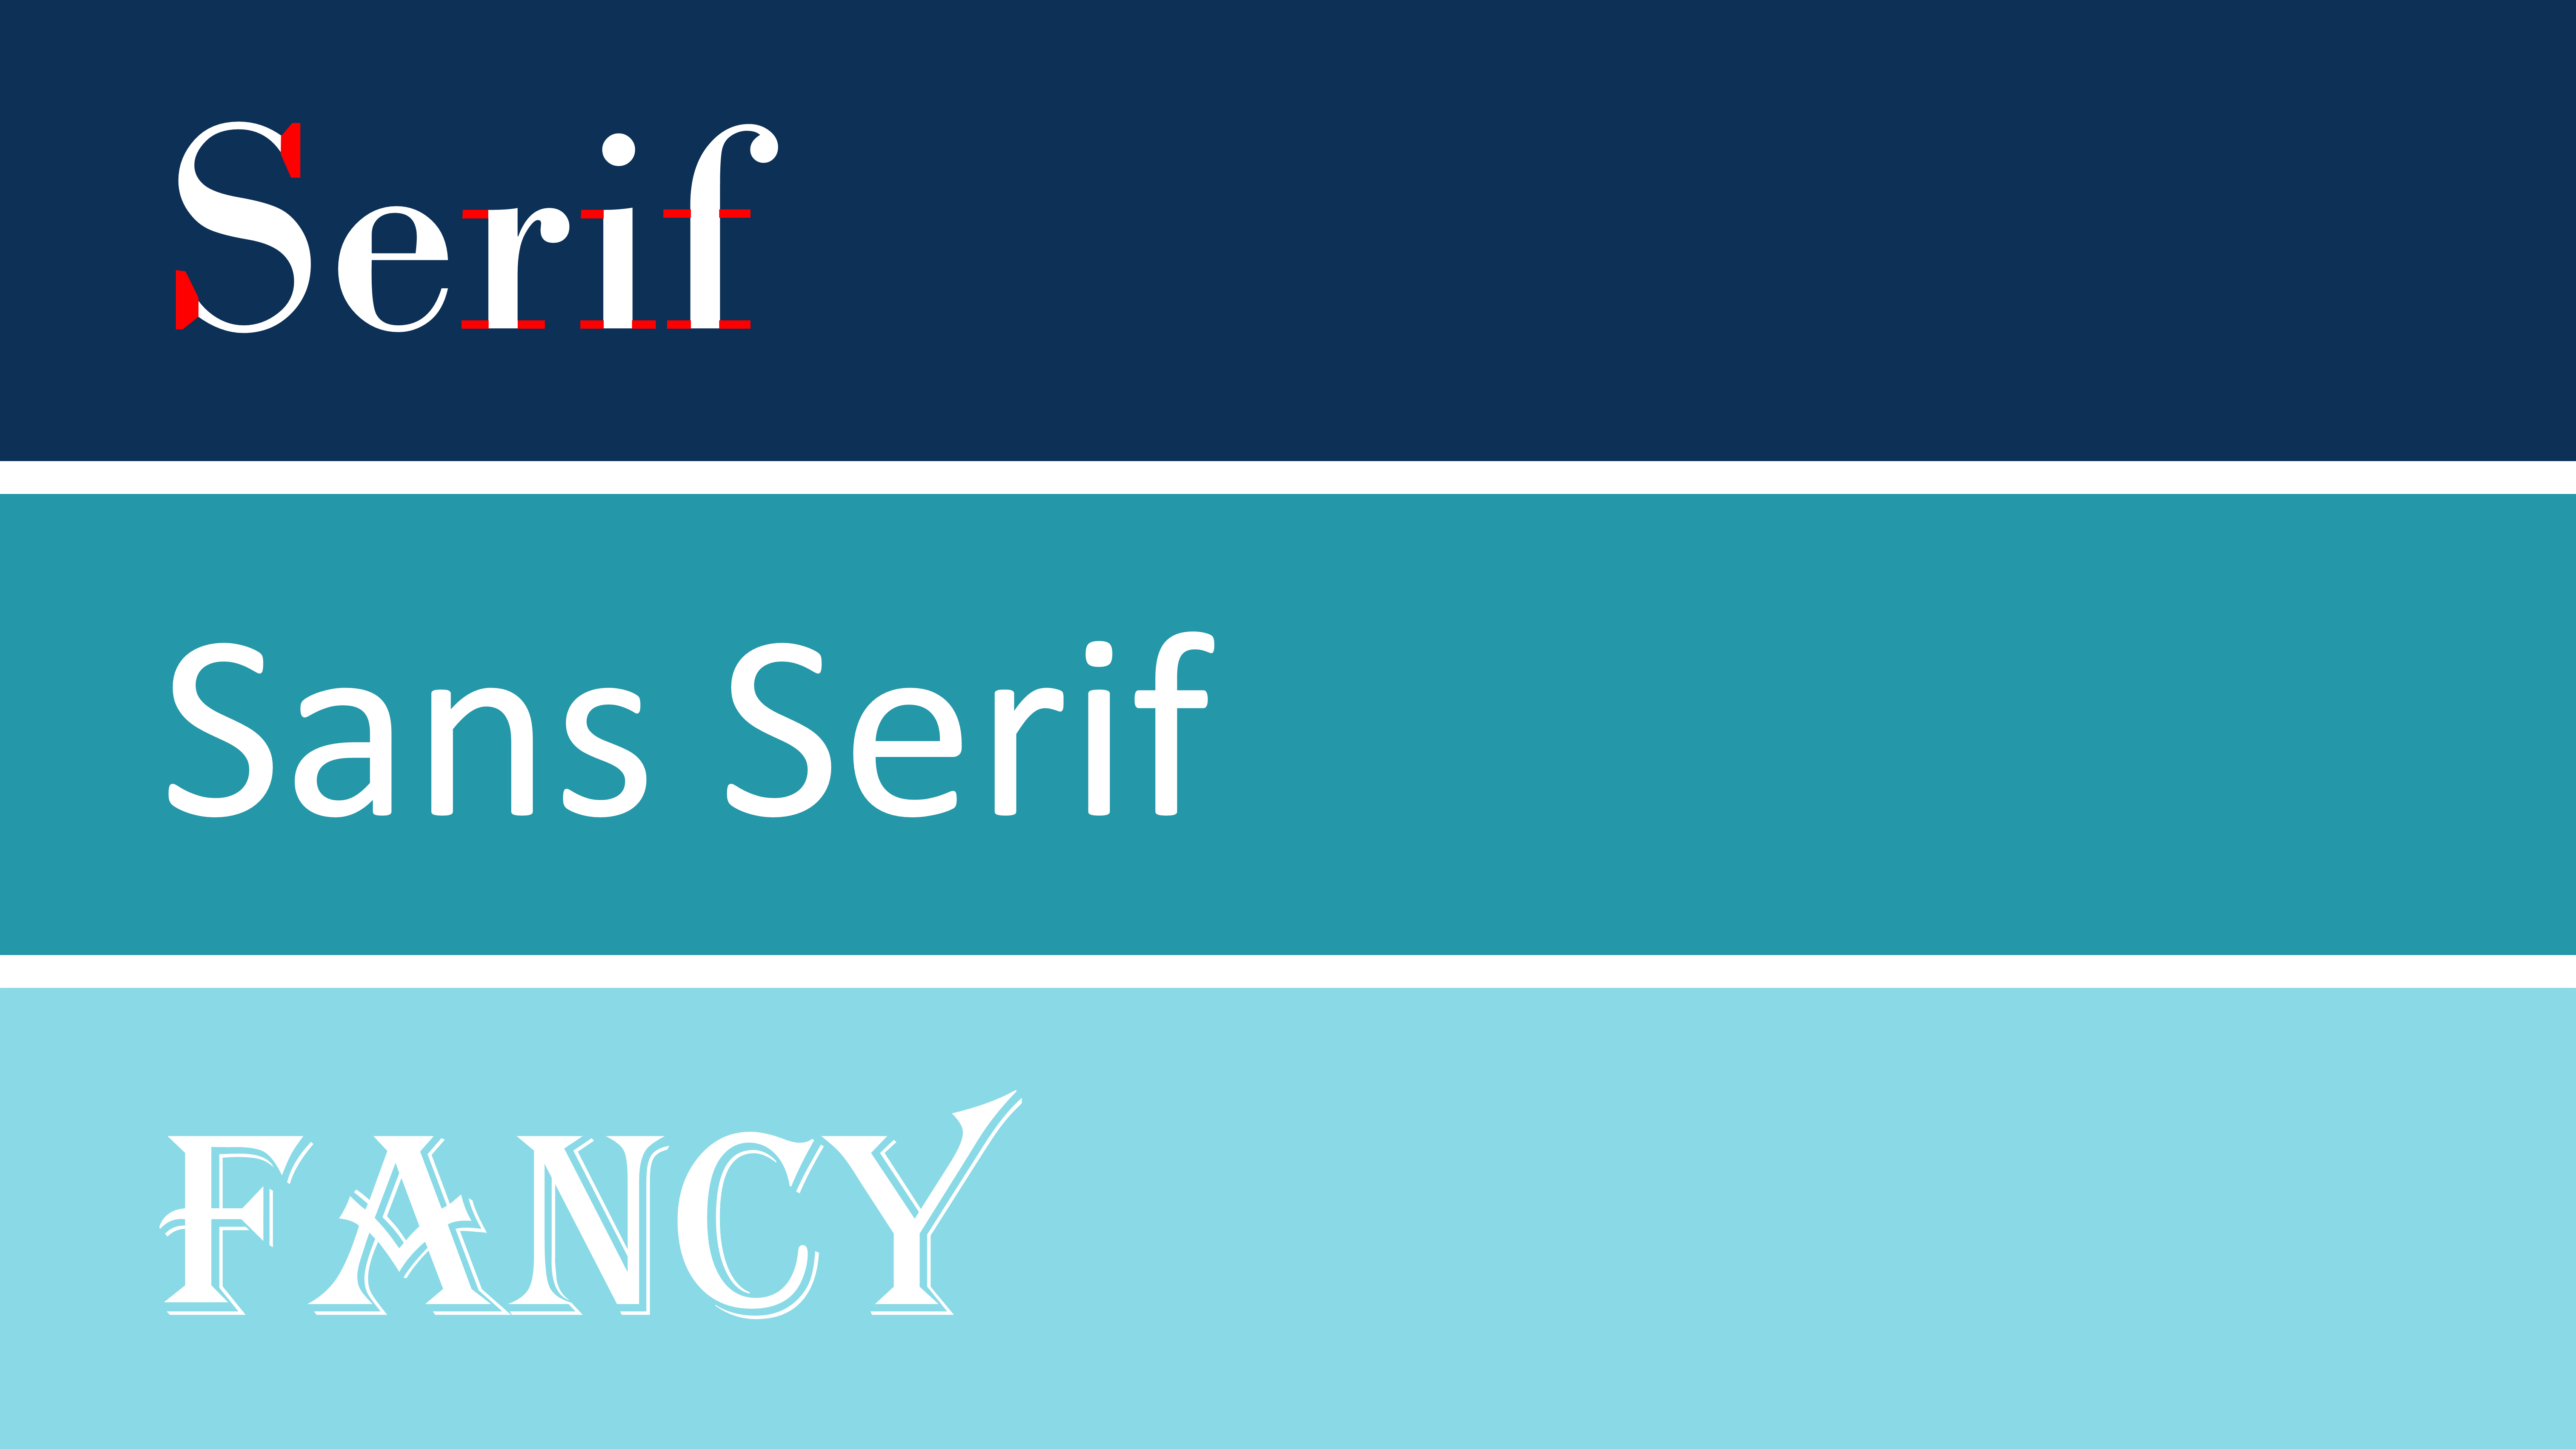 difference between serif and sans serif font